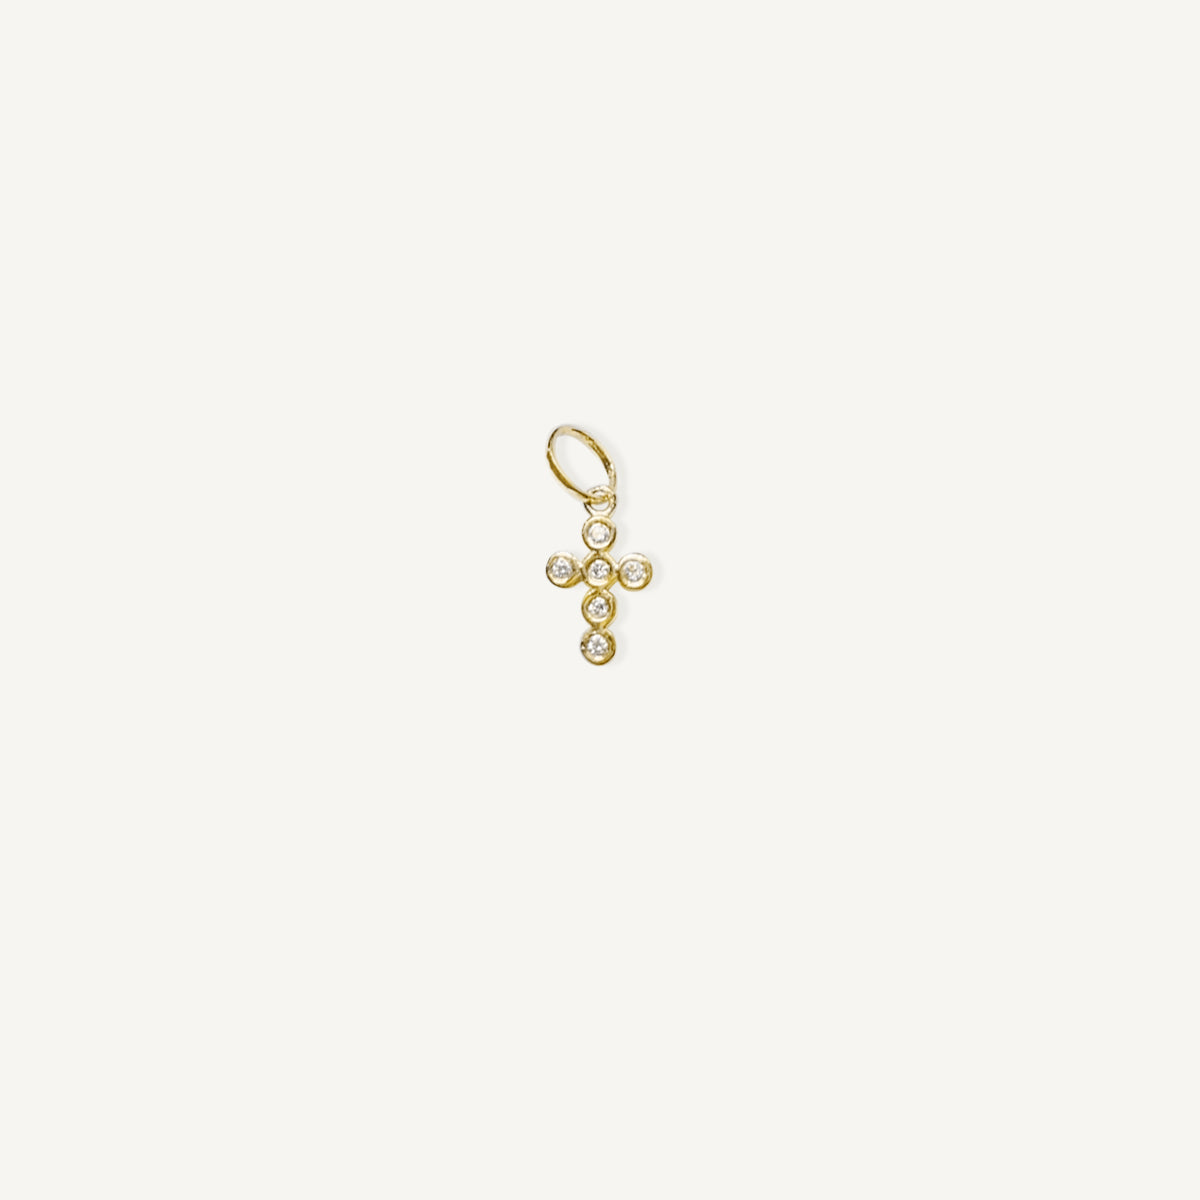 The Bubble Cross Diamond Charm in Solid Gold